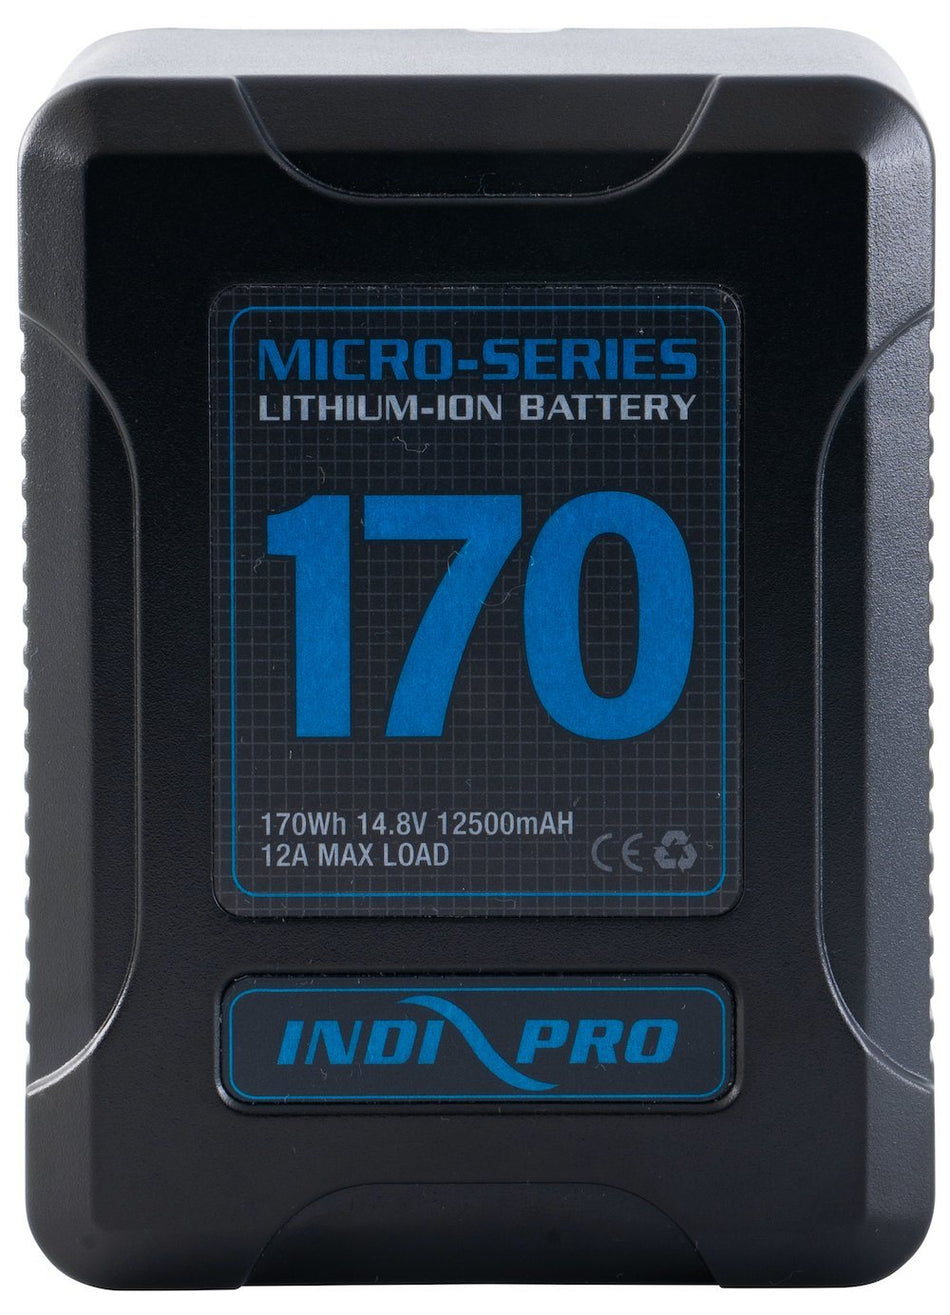 IndiPro Tools VMP170S Micro-Series 170Wh V-Mount Li-Ion Battery